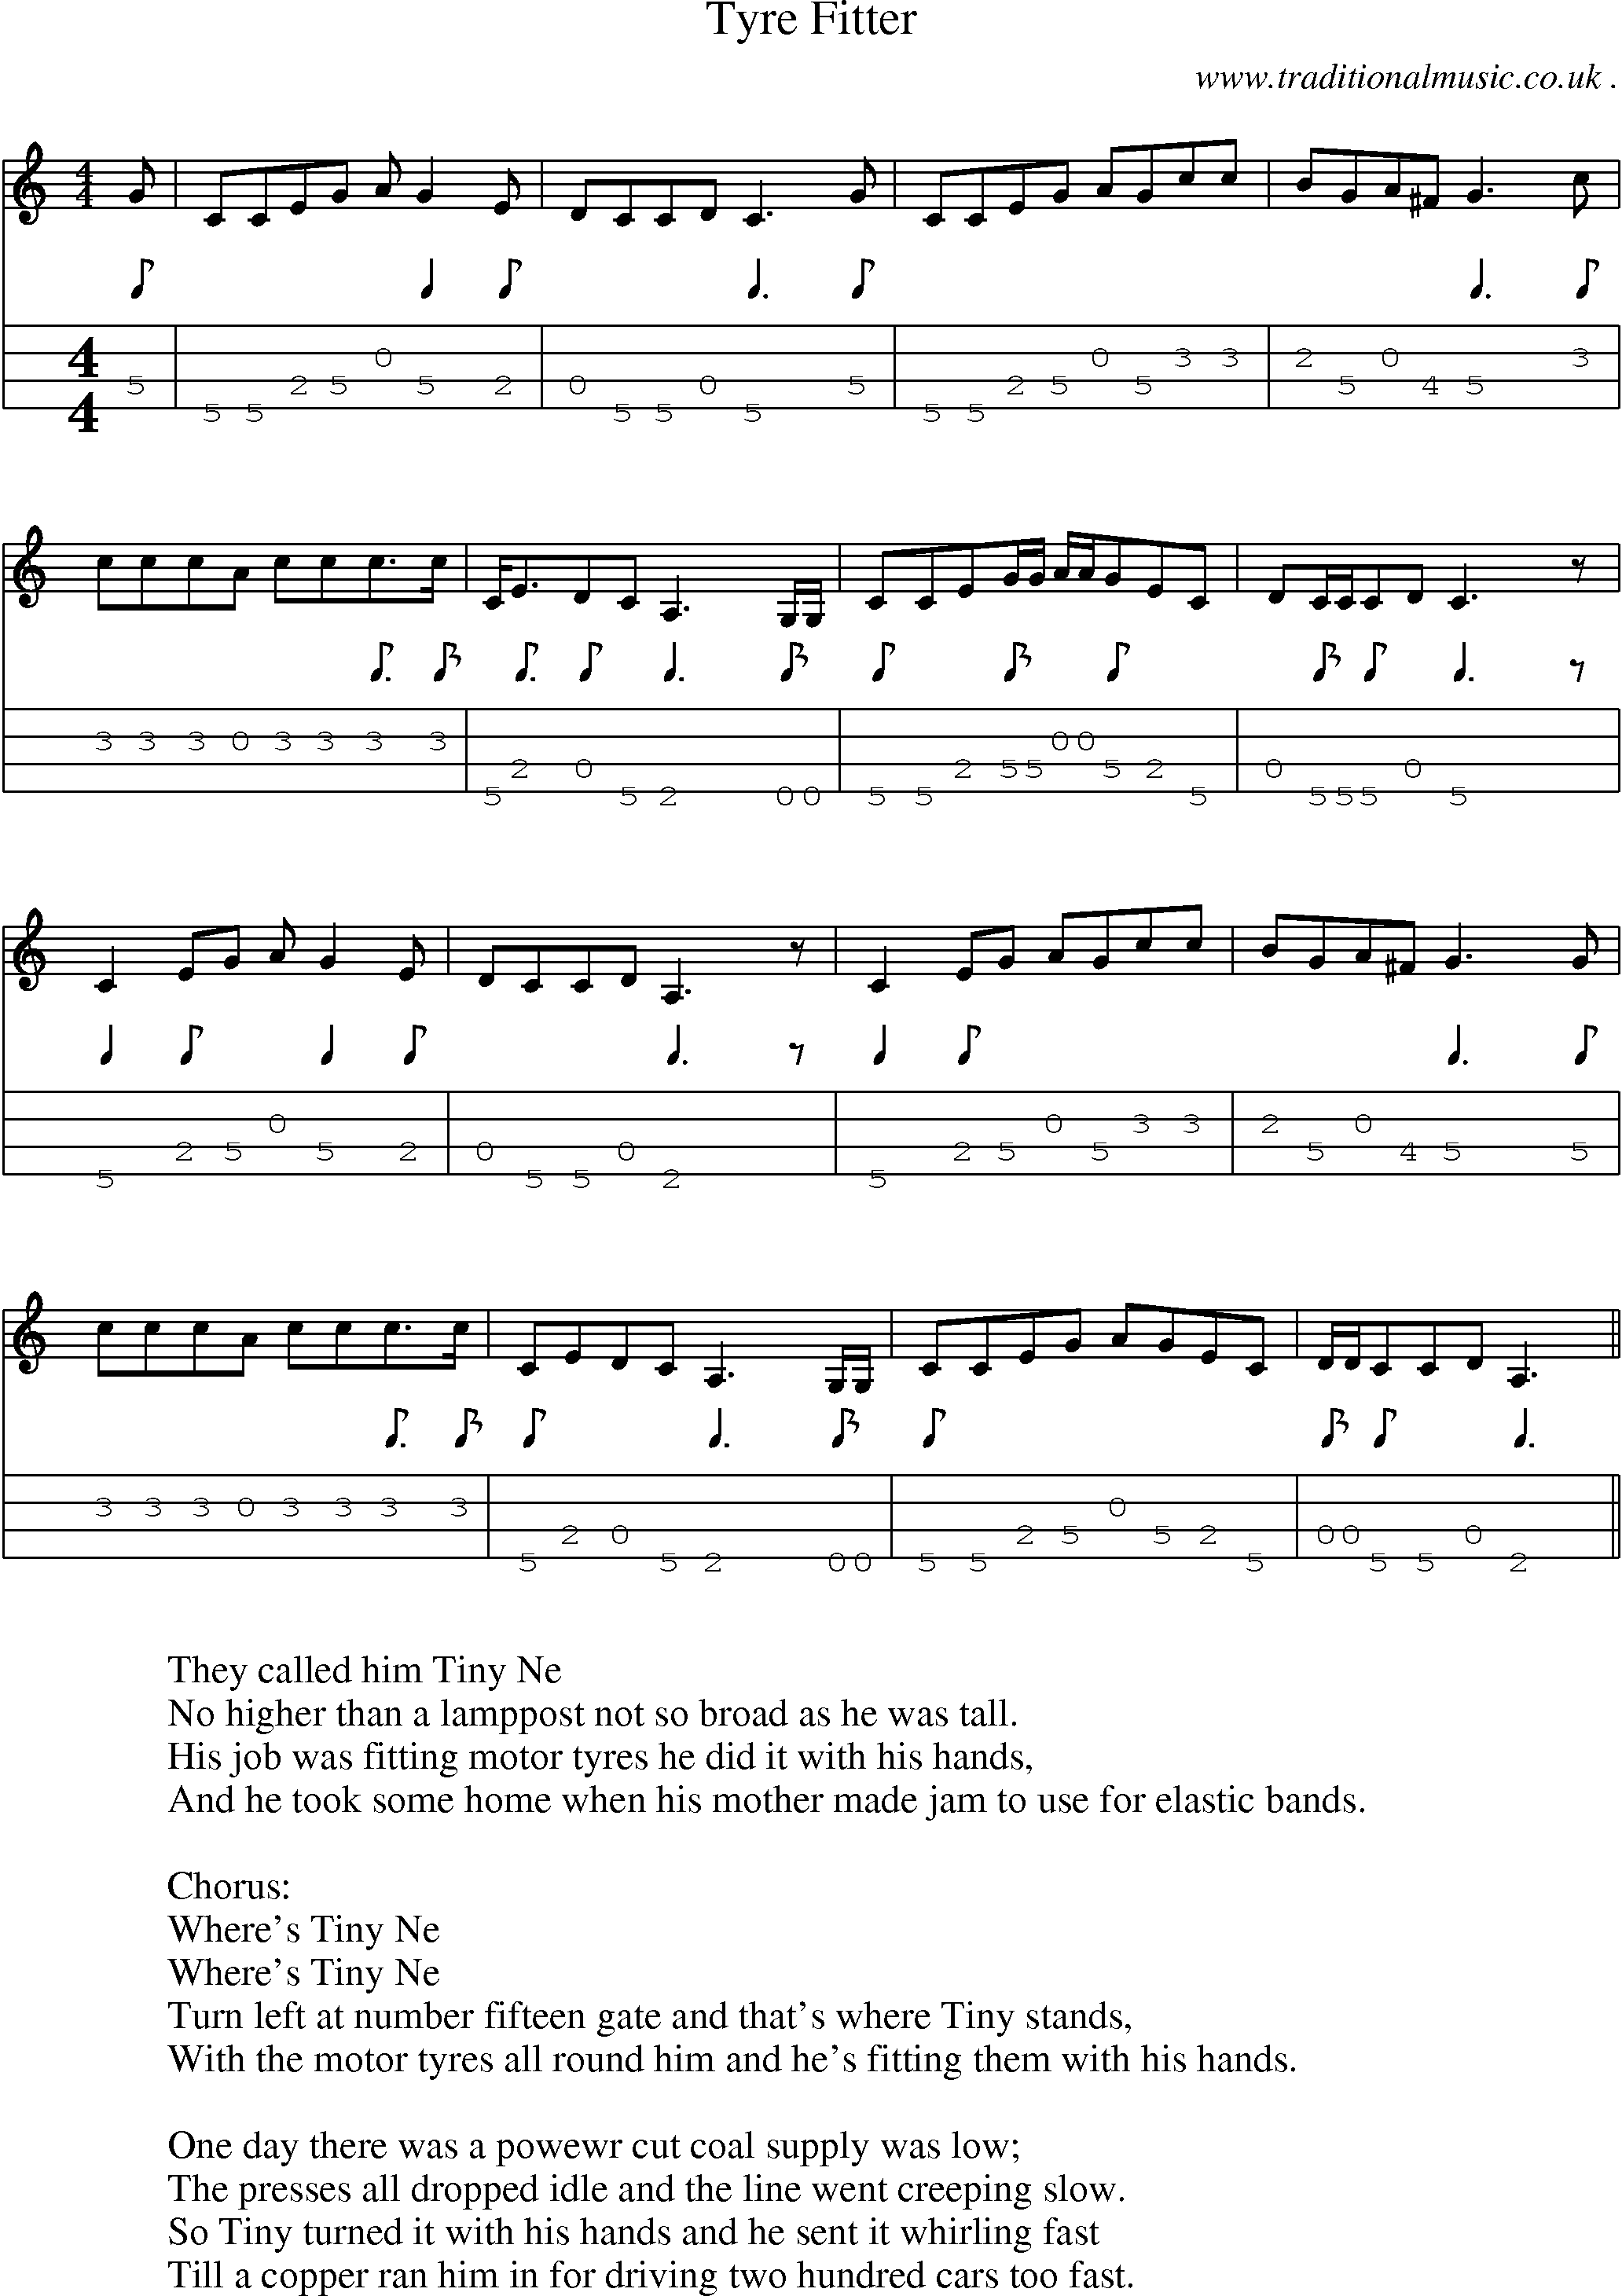 Sheet-Music and Mandolin Tabs for Tyre Fitter